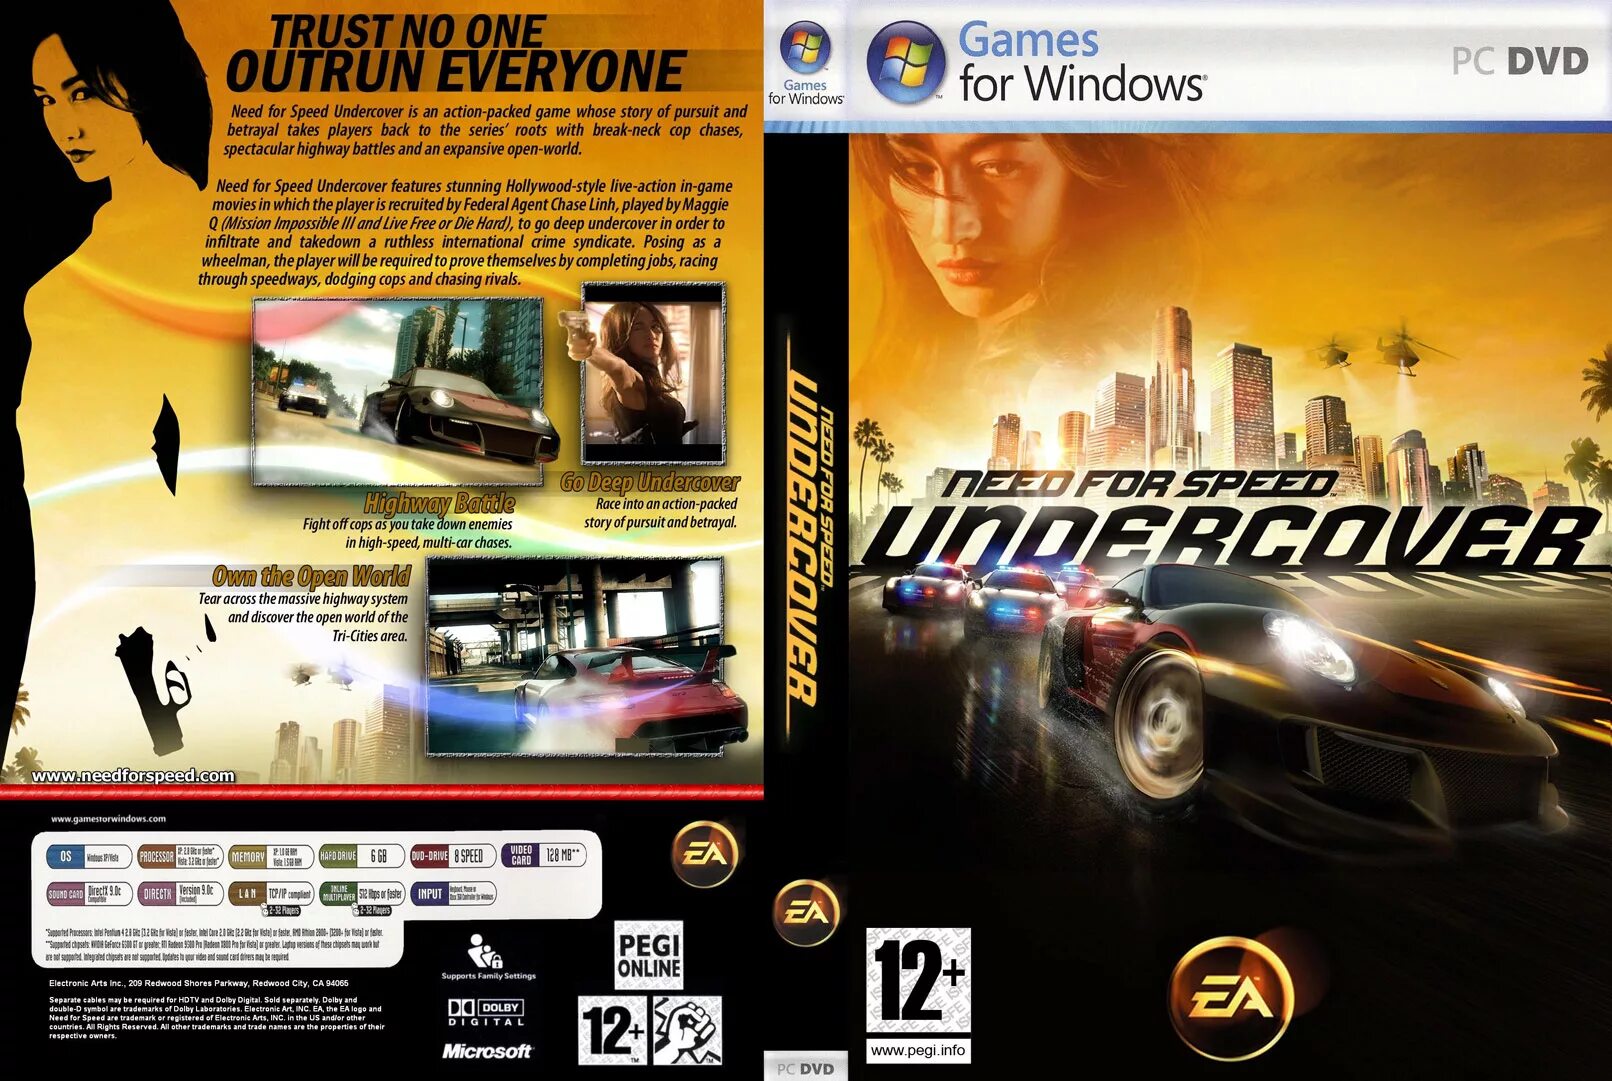 Need for Speed Undercover ps2 диск. Диск need for Speed Undercover на ПК. Need for Speed Undercover Xbox 360 обложка. Need for Speed Undercover ps2 обложка. Песни из игры need for speed